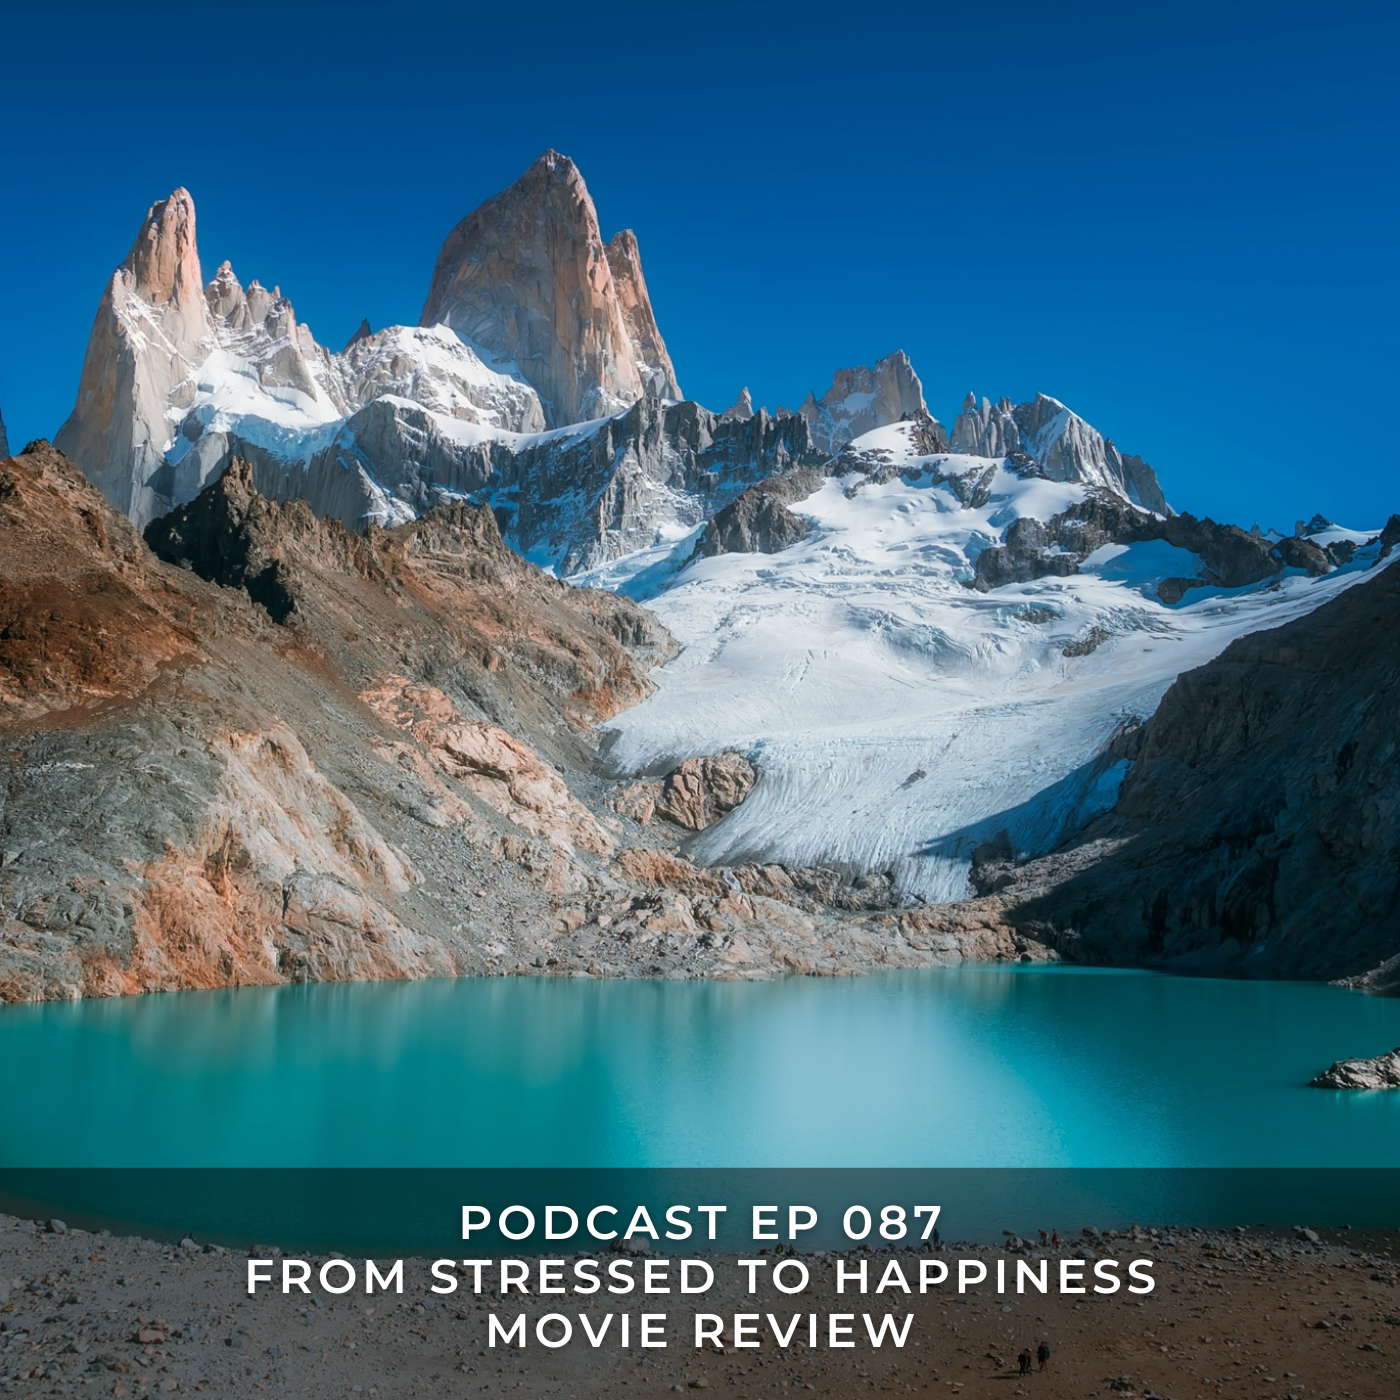 From Stressed to Happiness Movie Review & Easter Message - EP 087